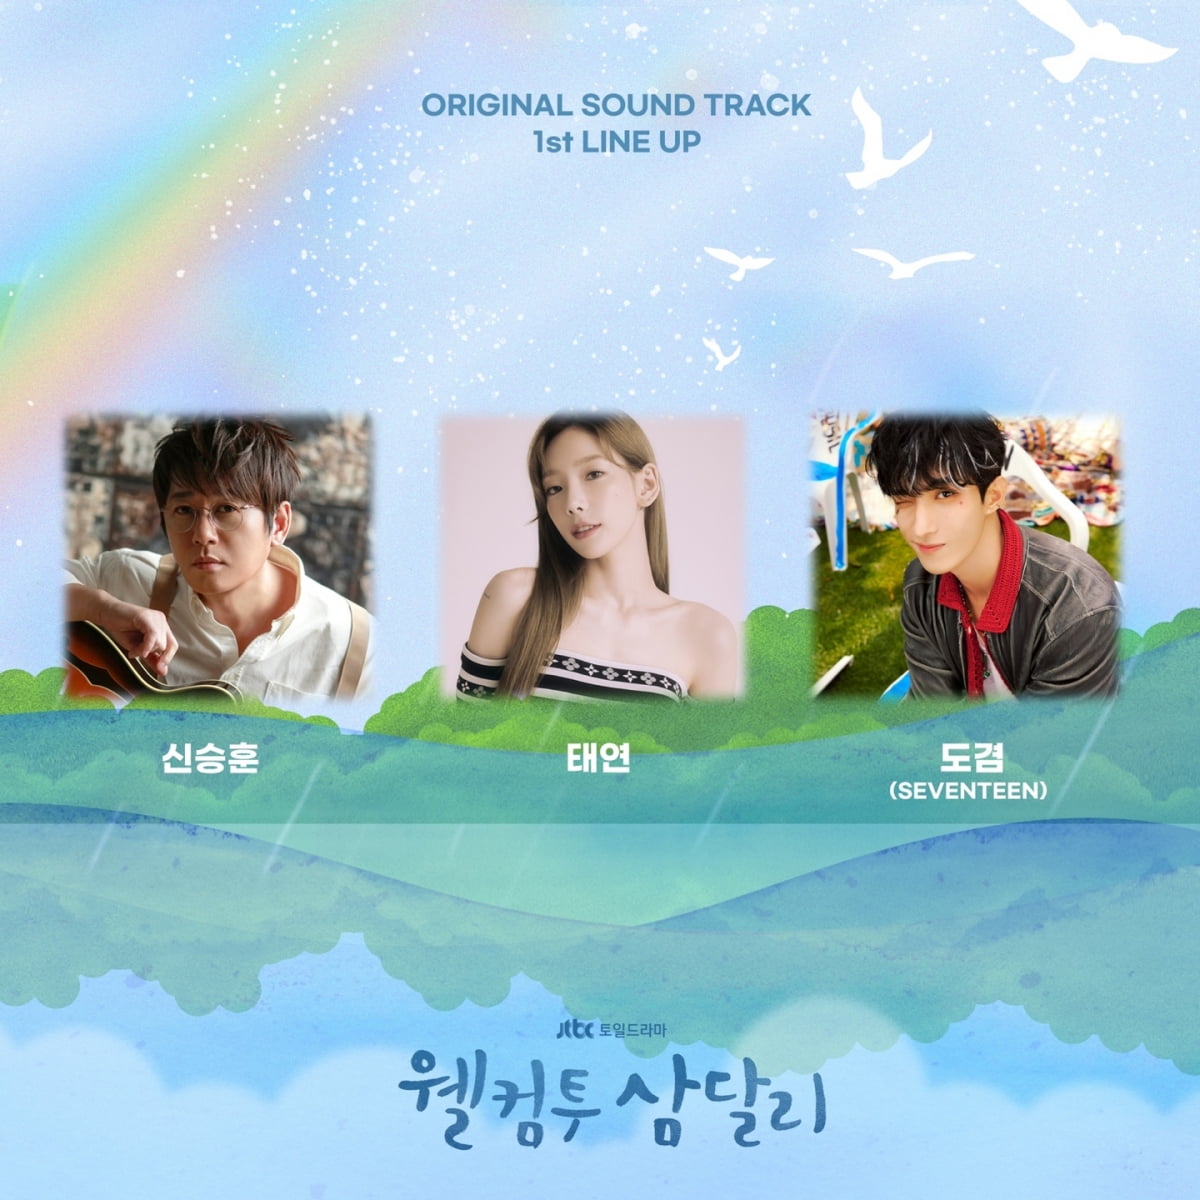 Shin Seung-hoon, Taeyeon, and Seventeen's Dokyeom participate in the 'Welcome to Samdali' OST